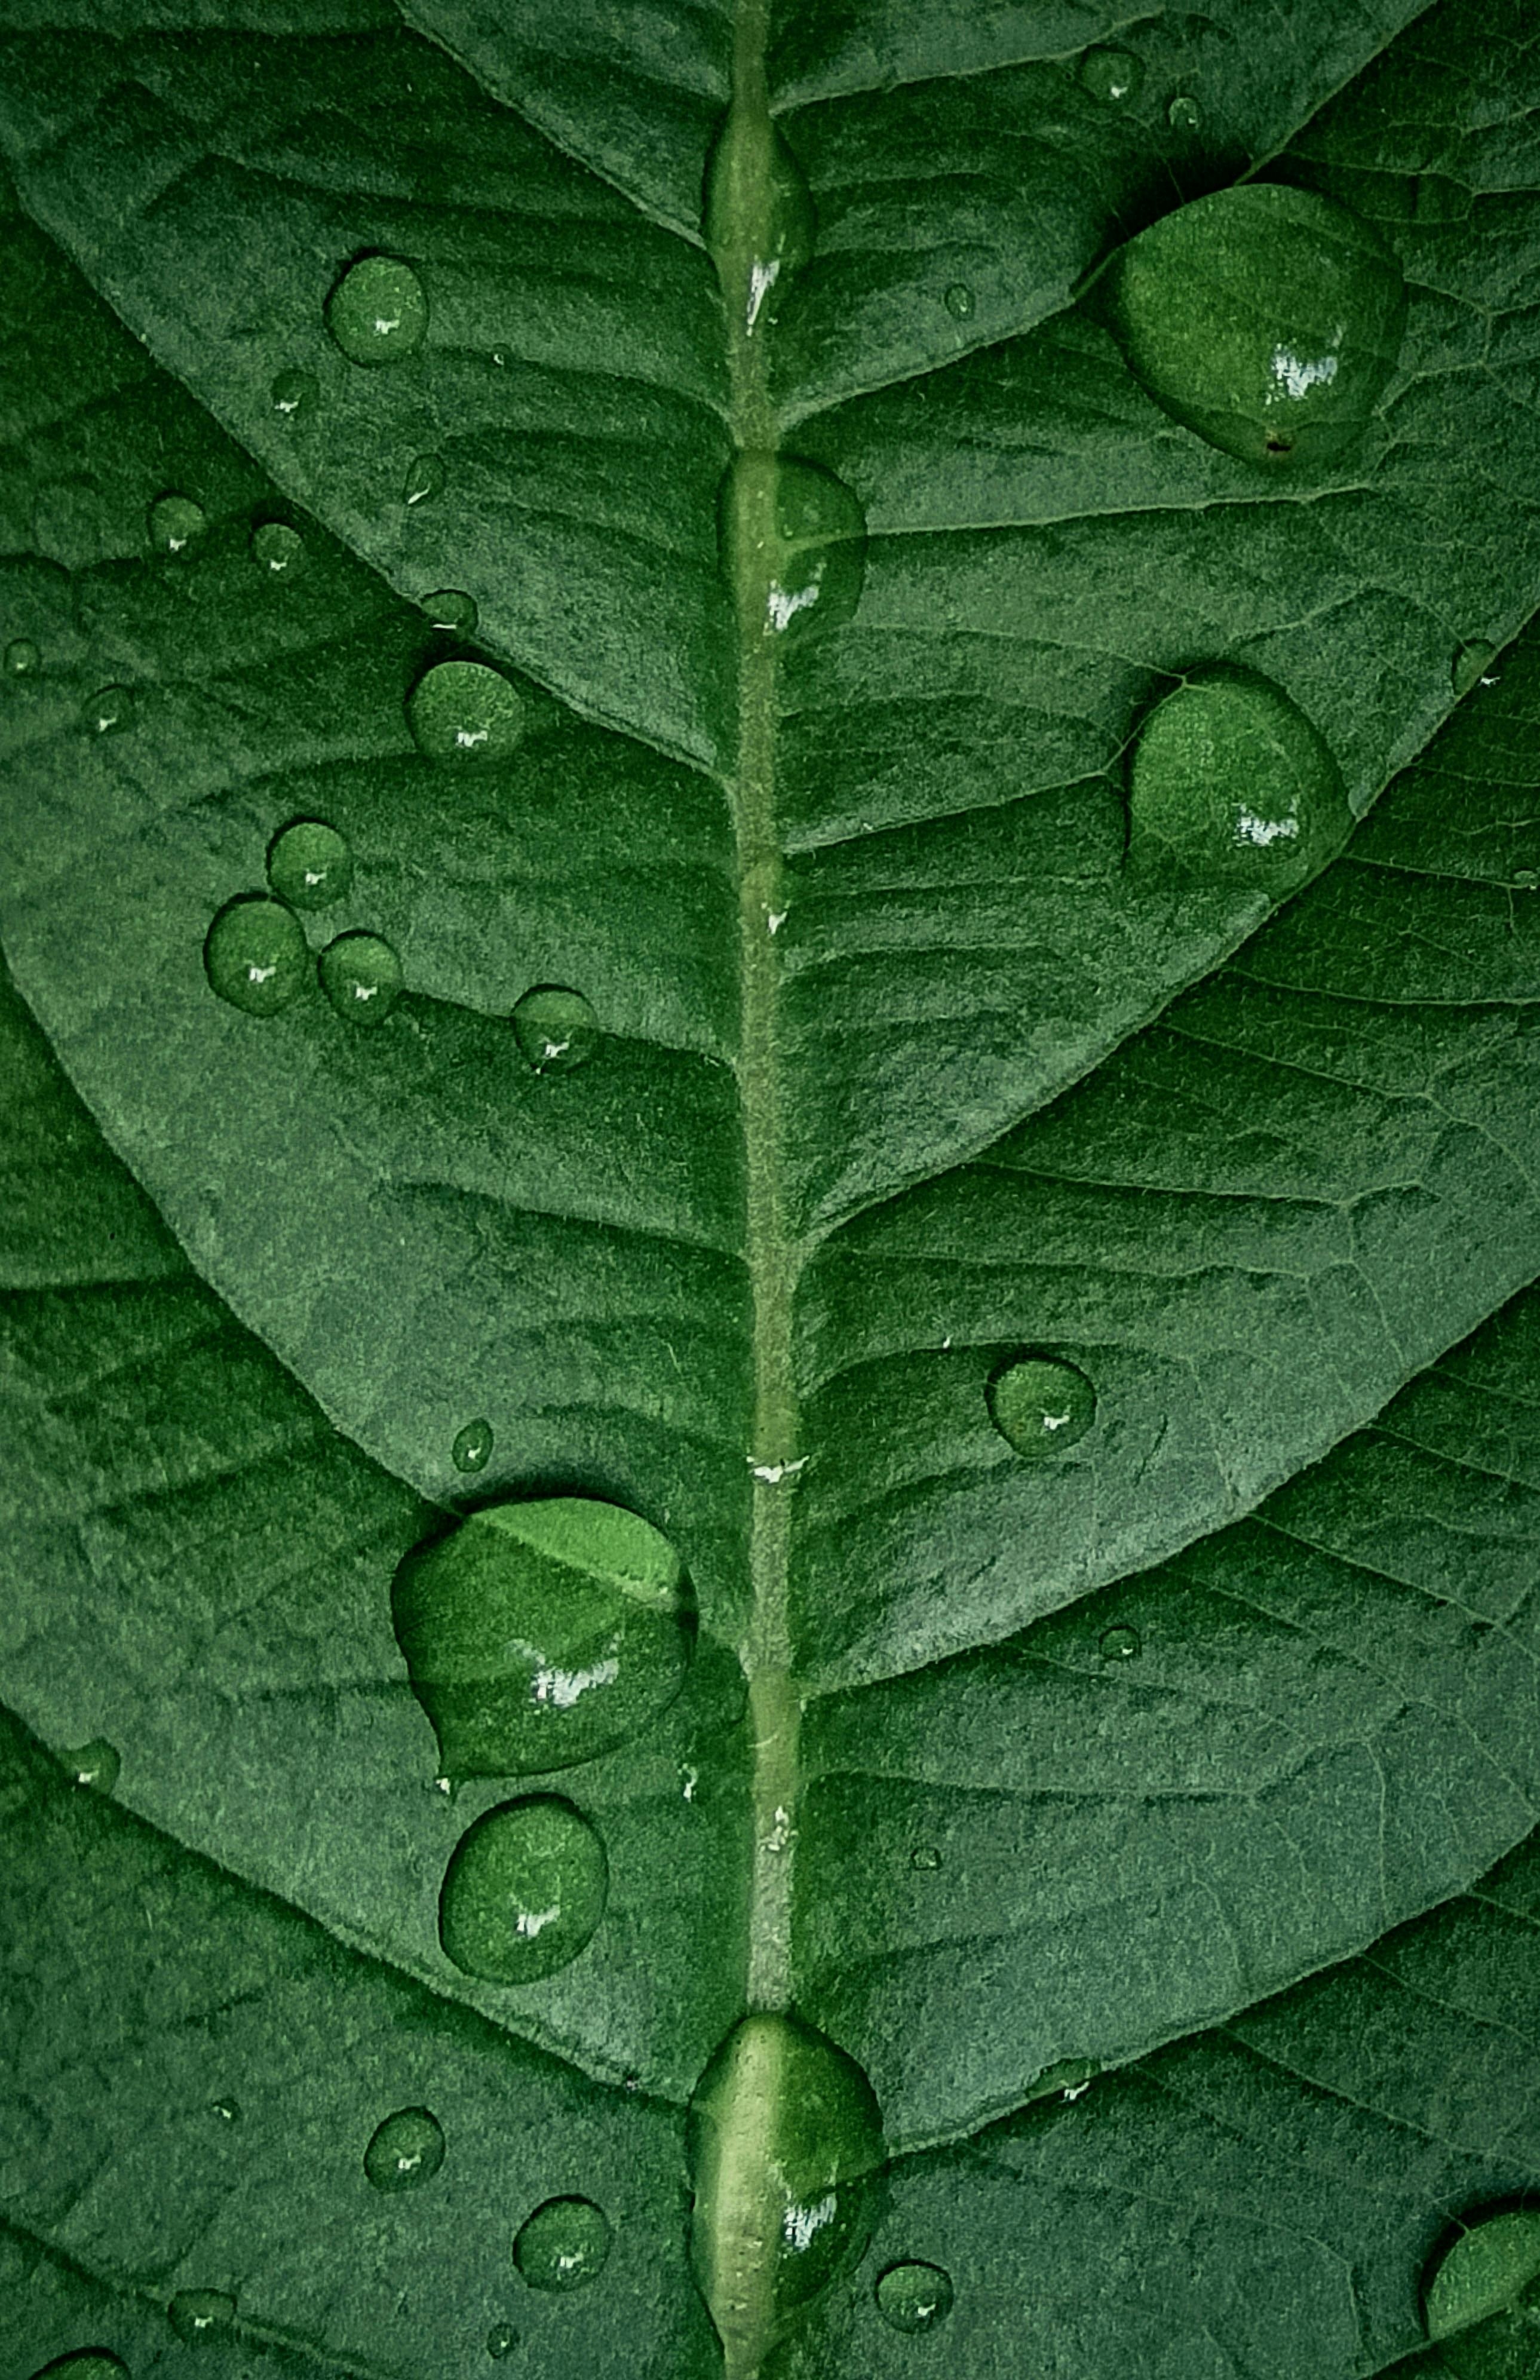 a green leaf with water drops on it